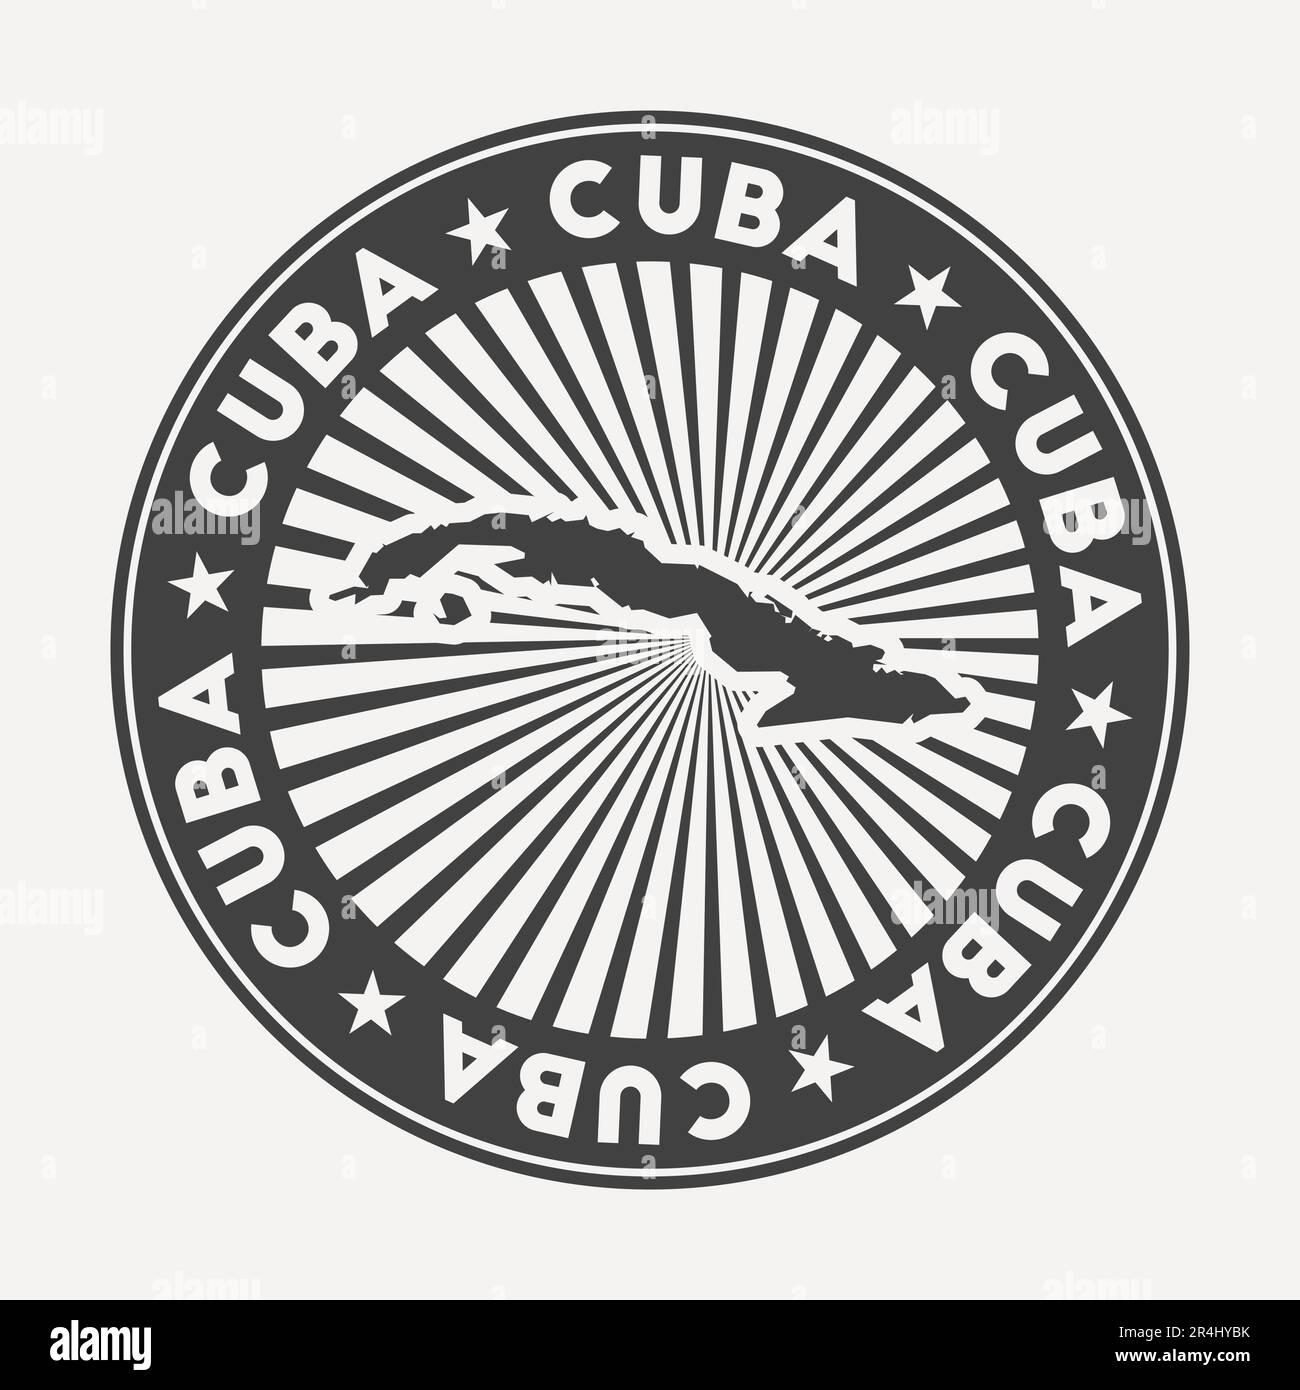 Cuba round logo. Vintage travel badge with the circular name and map of country, vector illustration. Can be used as insignia, logotype, label, sticke Stock Vector